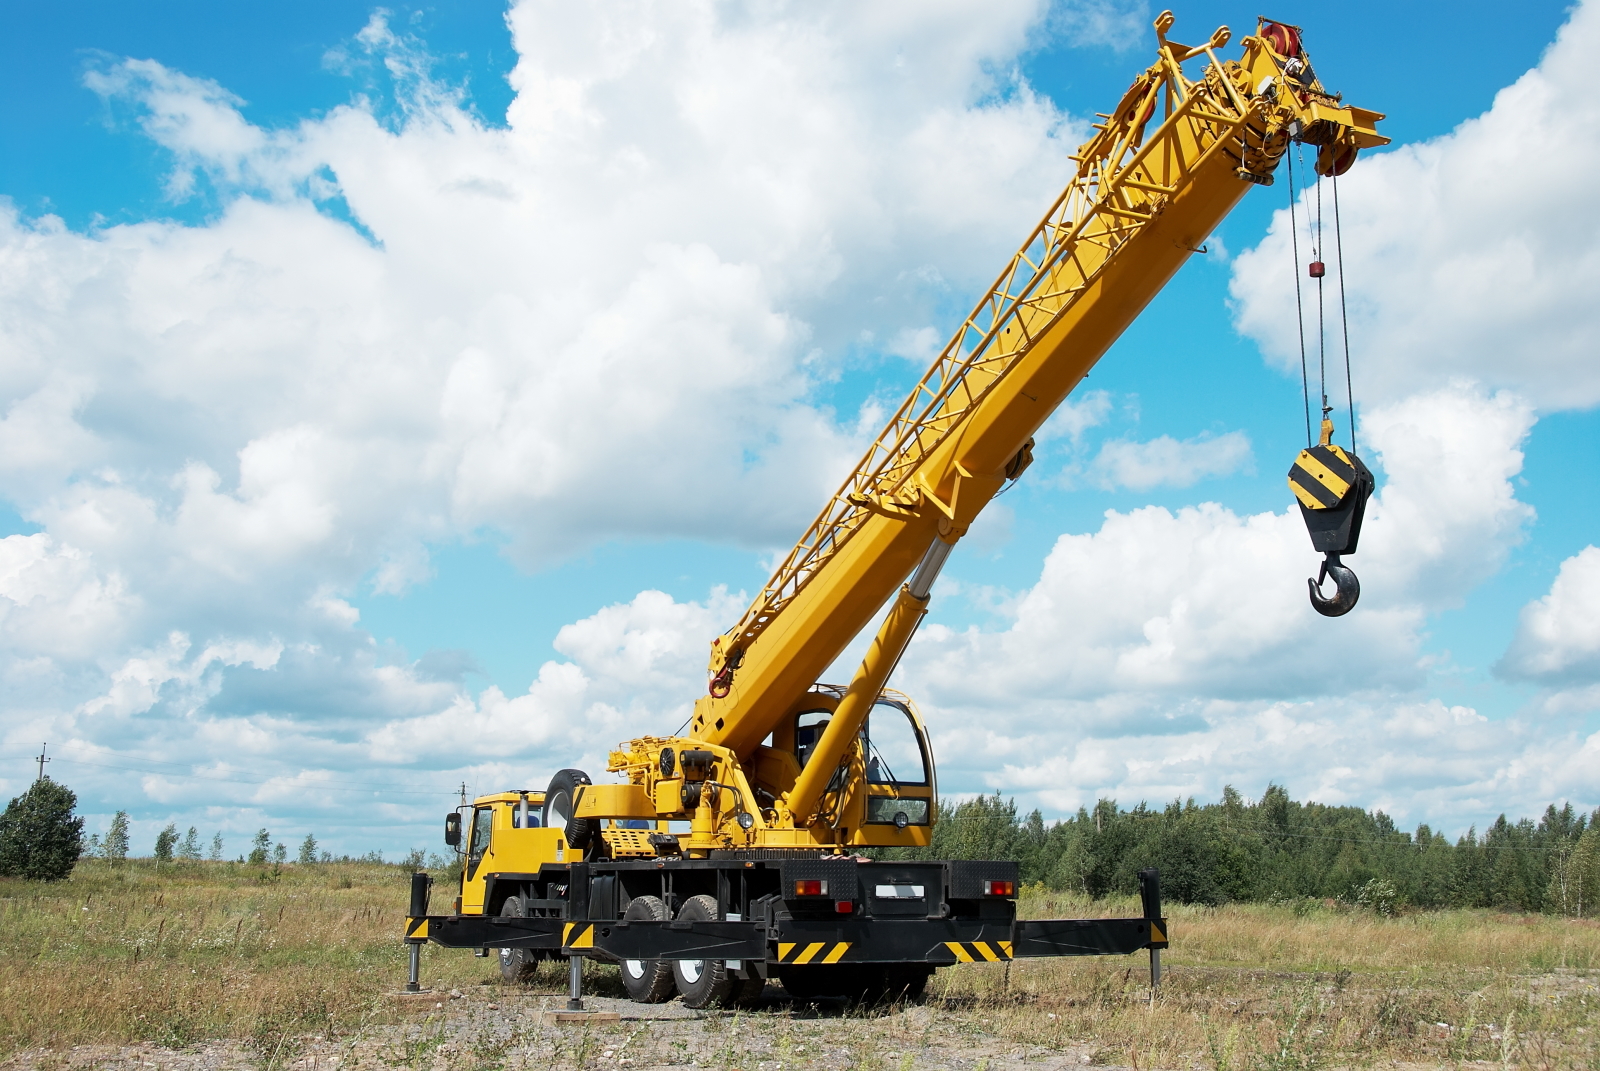 Due to highly complex controls and dynamism, mobile cranes are ideal for rapid prototyping with HiL simulation (icon).